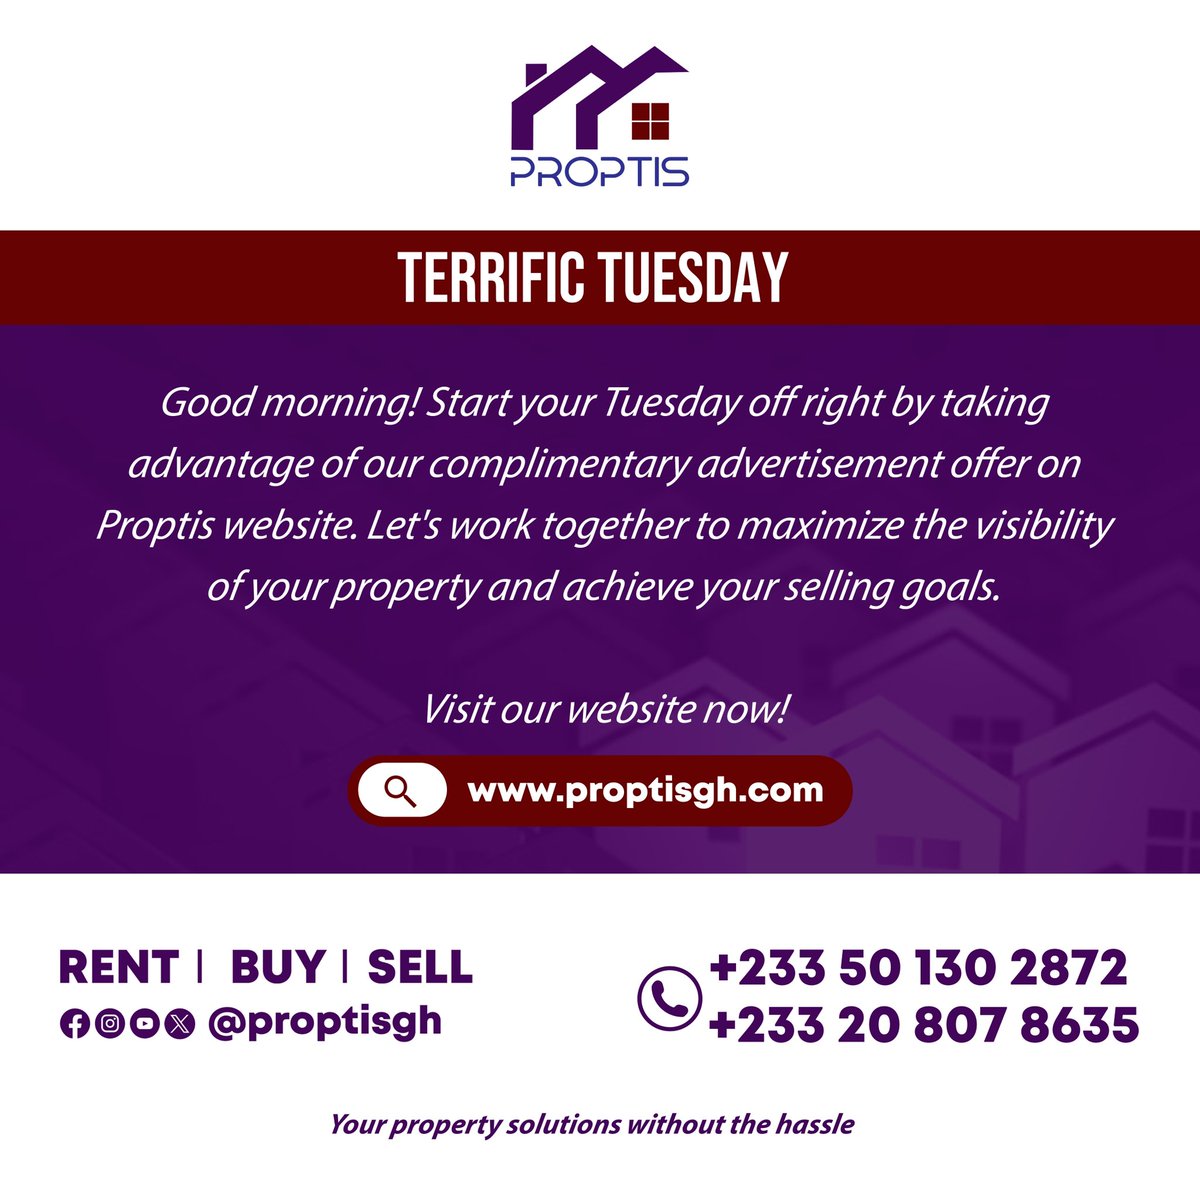 Call us on 0501302827/0208078635

 You can also leave us a message via whatsup 

#proptis #proptisgh #terrifictuesday #ghanaproperties #realestatewebsite #availableproperties